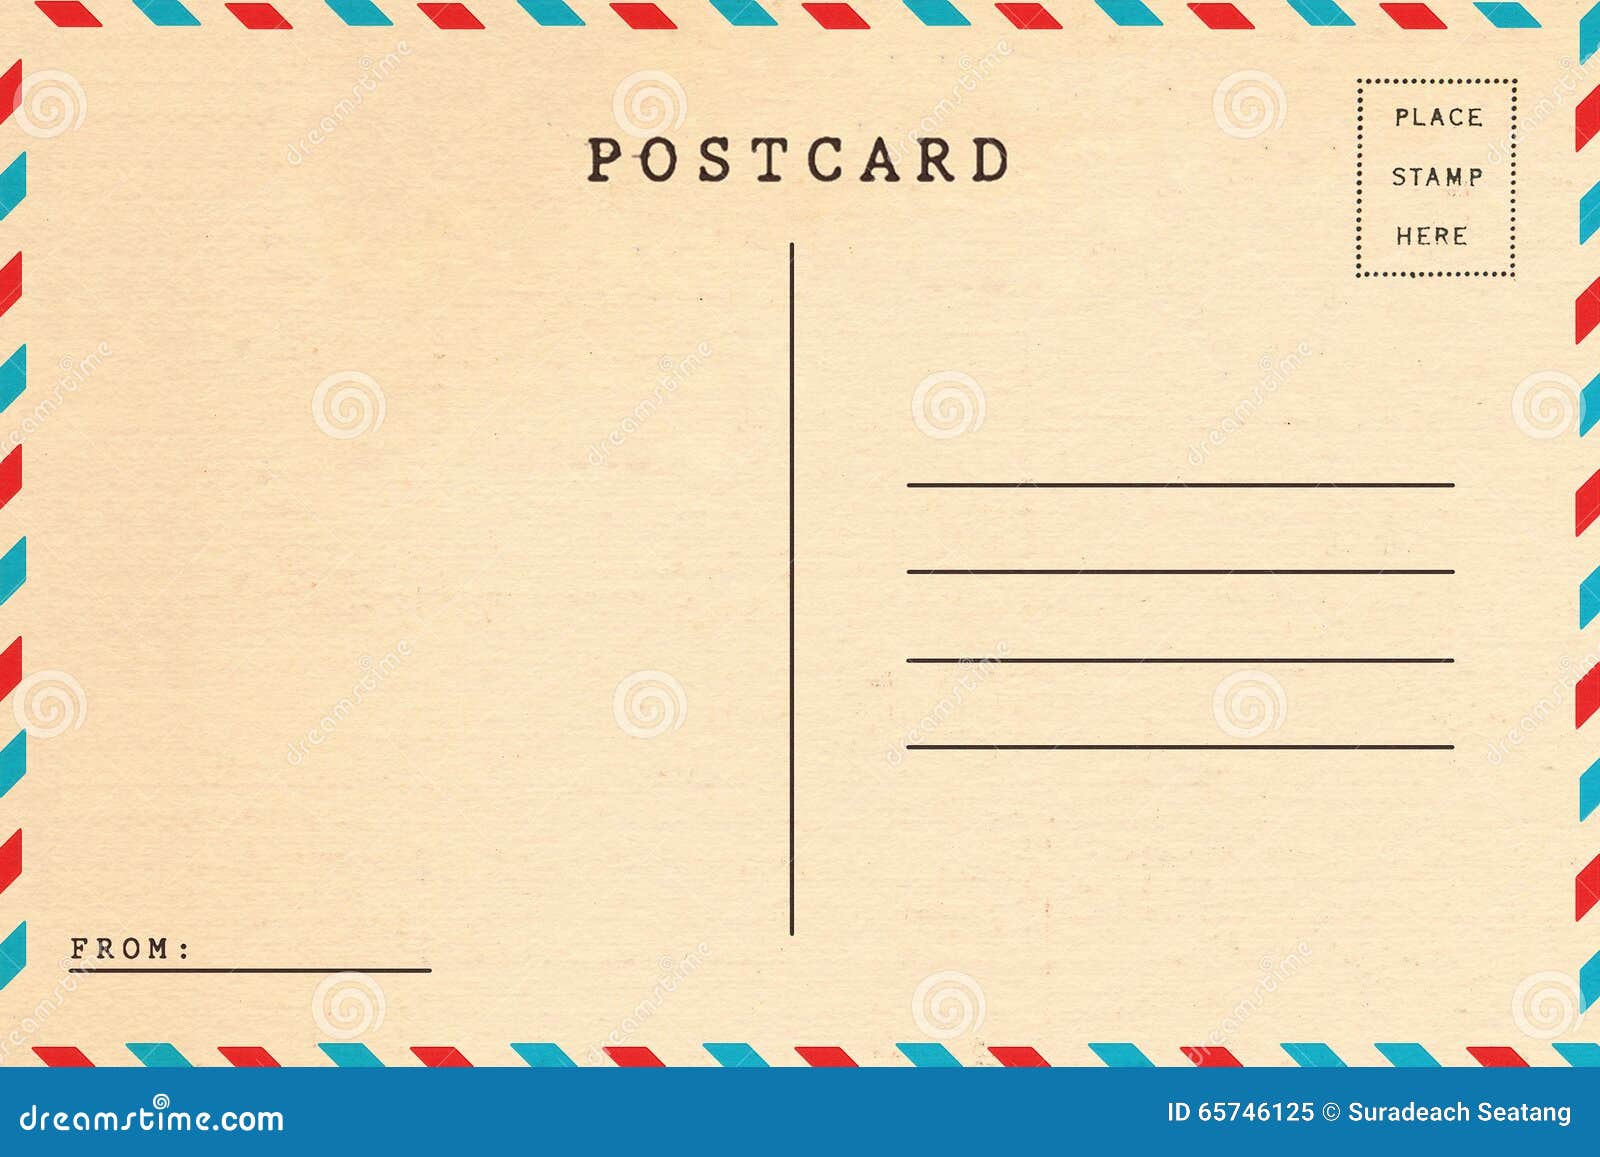 Back Of Vintage Blank Postcard Stock Photo, Picture and Royalty Free Image.  Image 49101670.